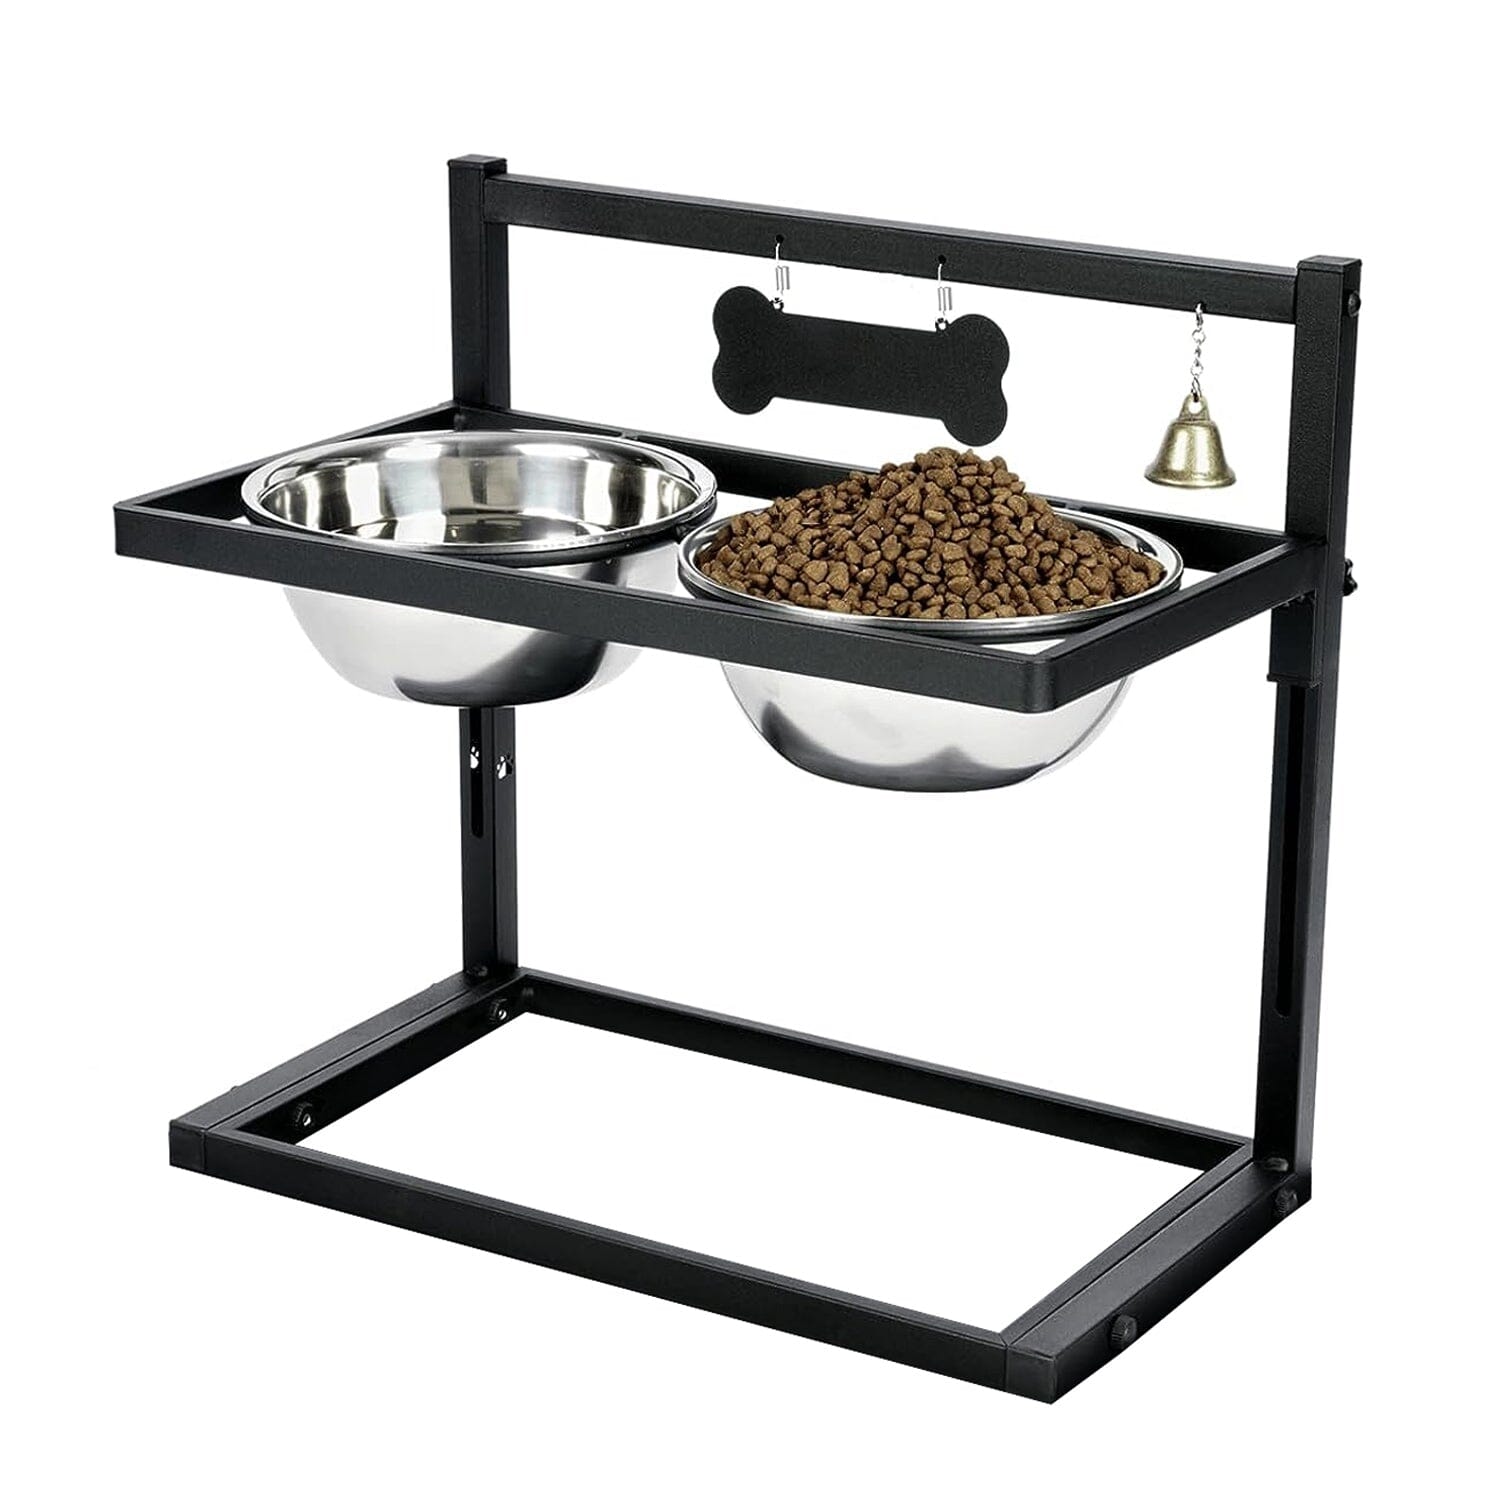 https://dailysale.com/cdn/shop/files/dog-raised-bowls-with-adjustable-height-stainless-steel-pet-supplies-dailysale-718756.jpg?v=1698787992